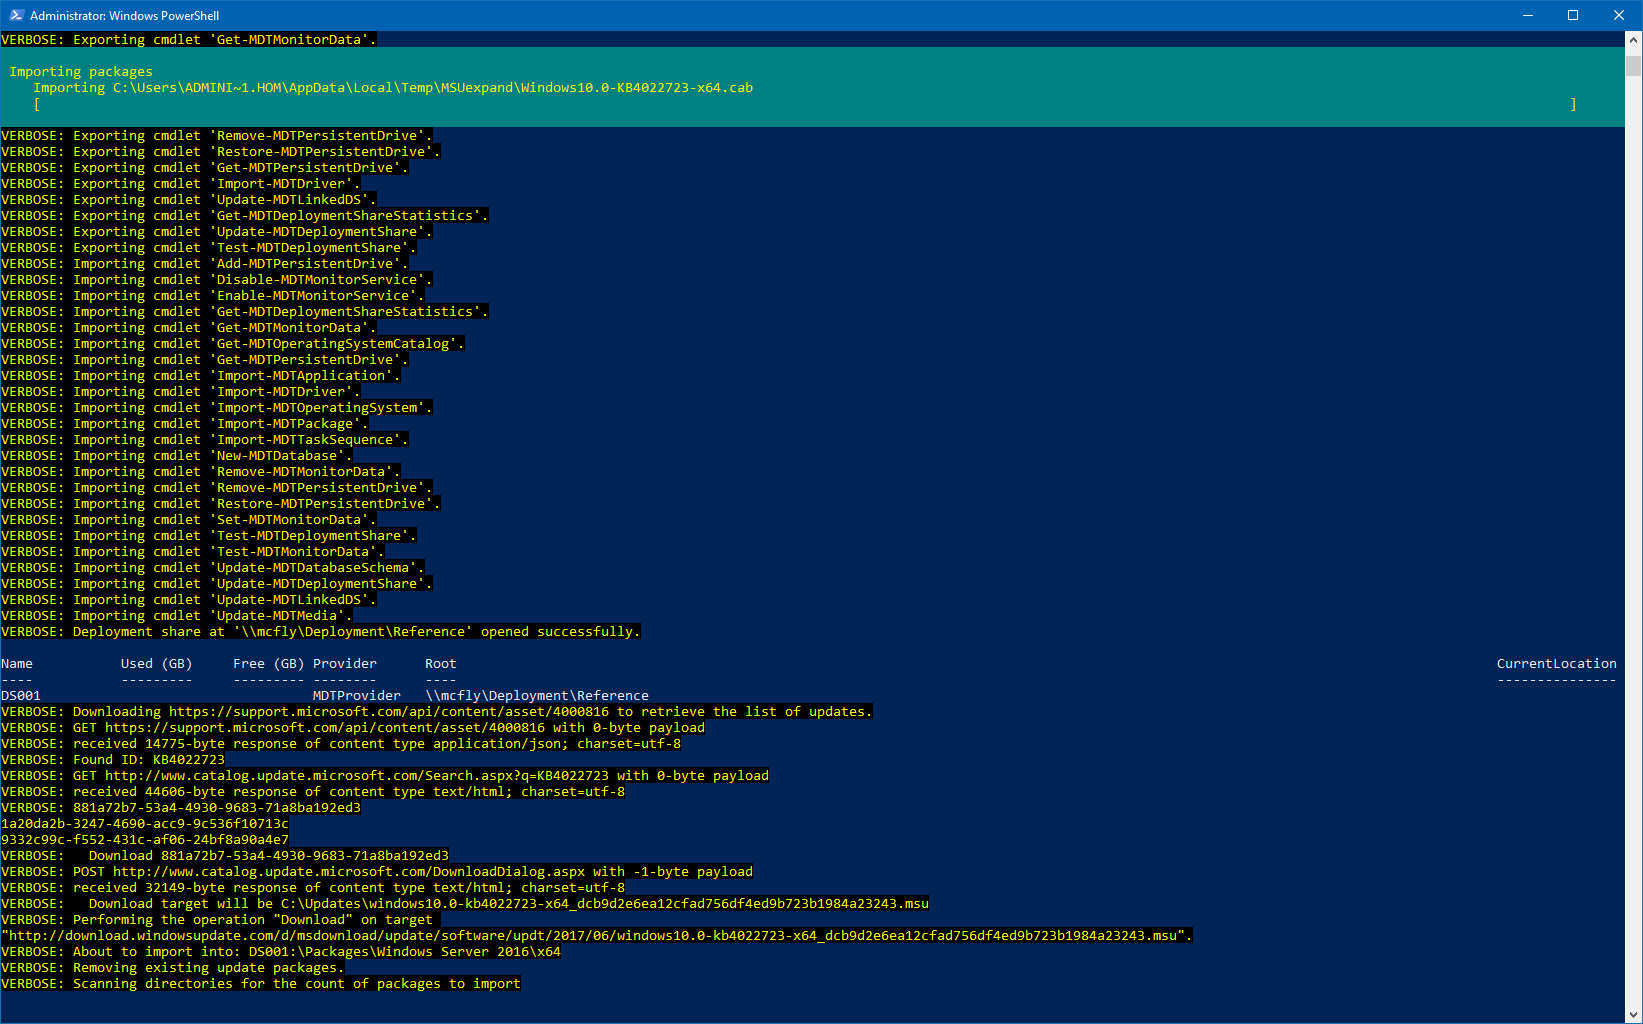 Downloading and importing updates into MDT via PowerShell